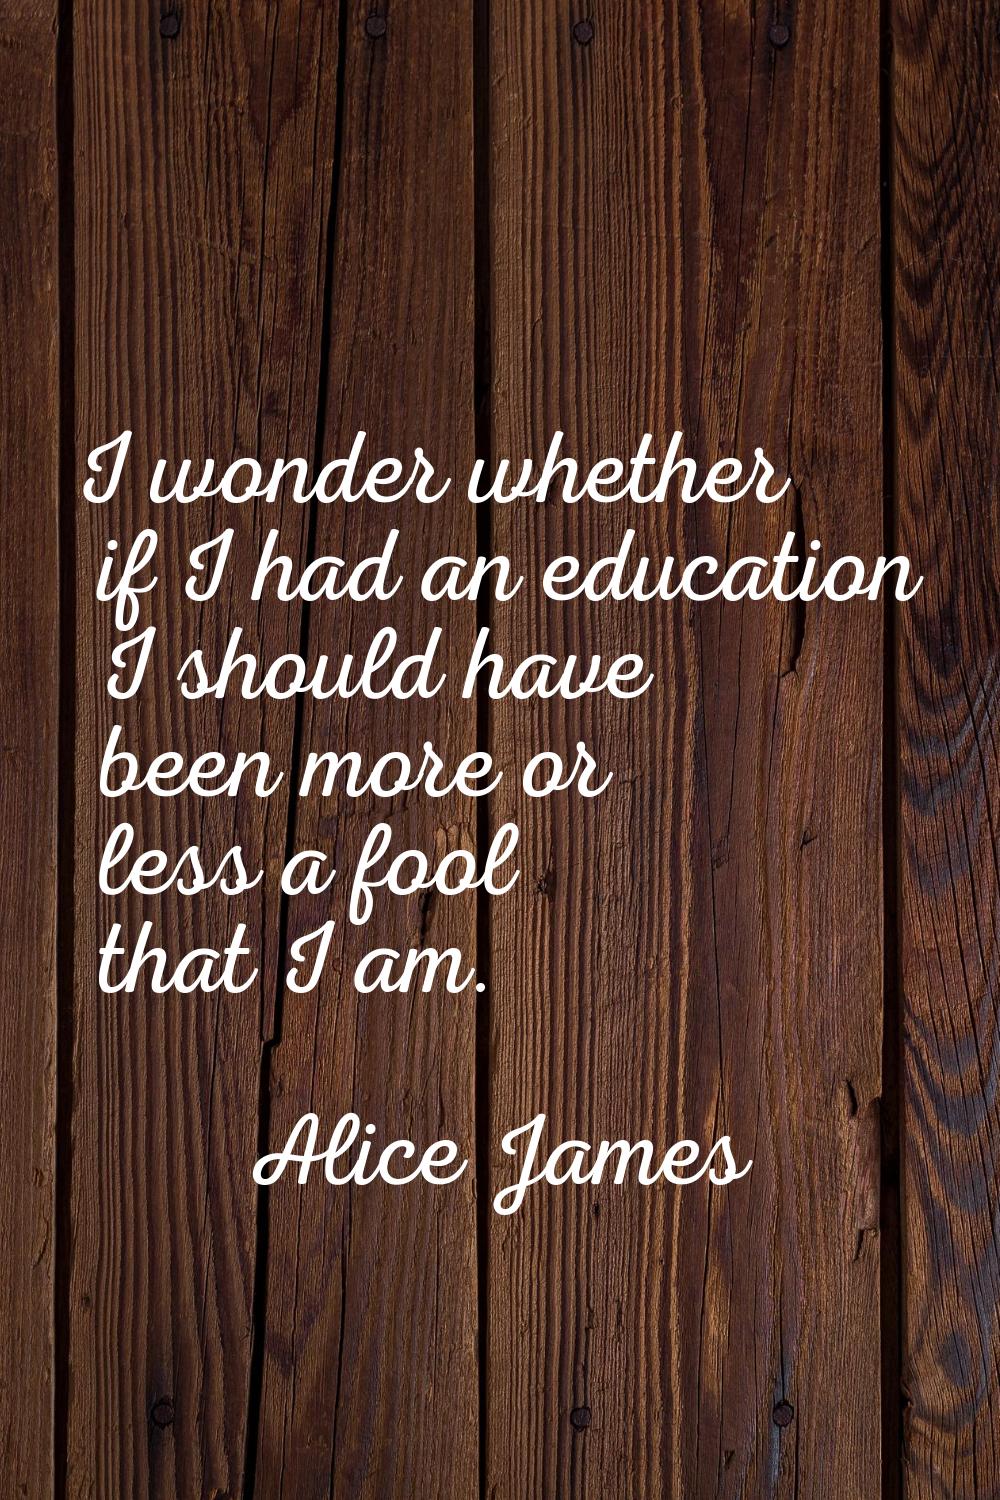 I wonder whether if I had an education I should have been more or less a fool that I am.